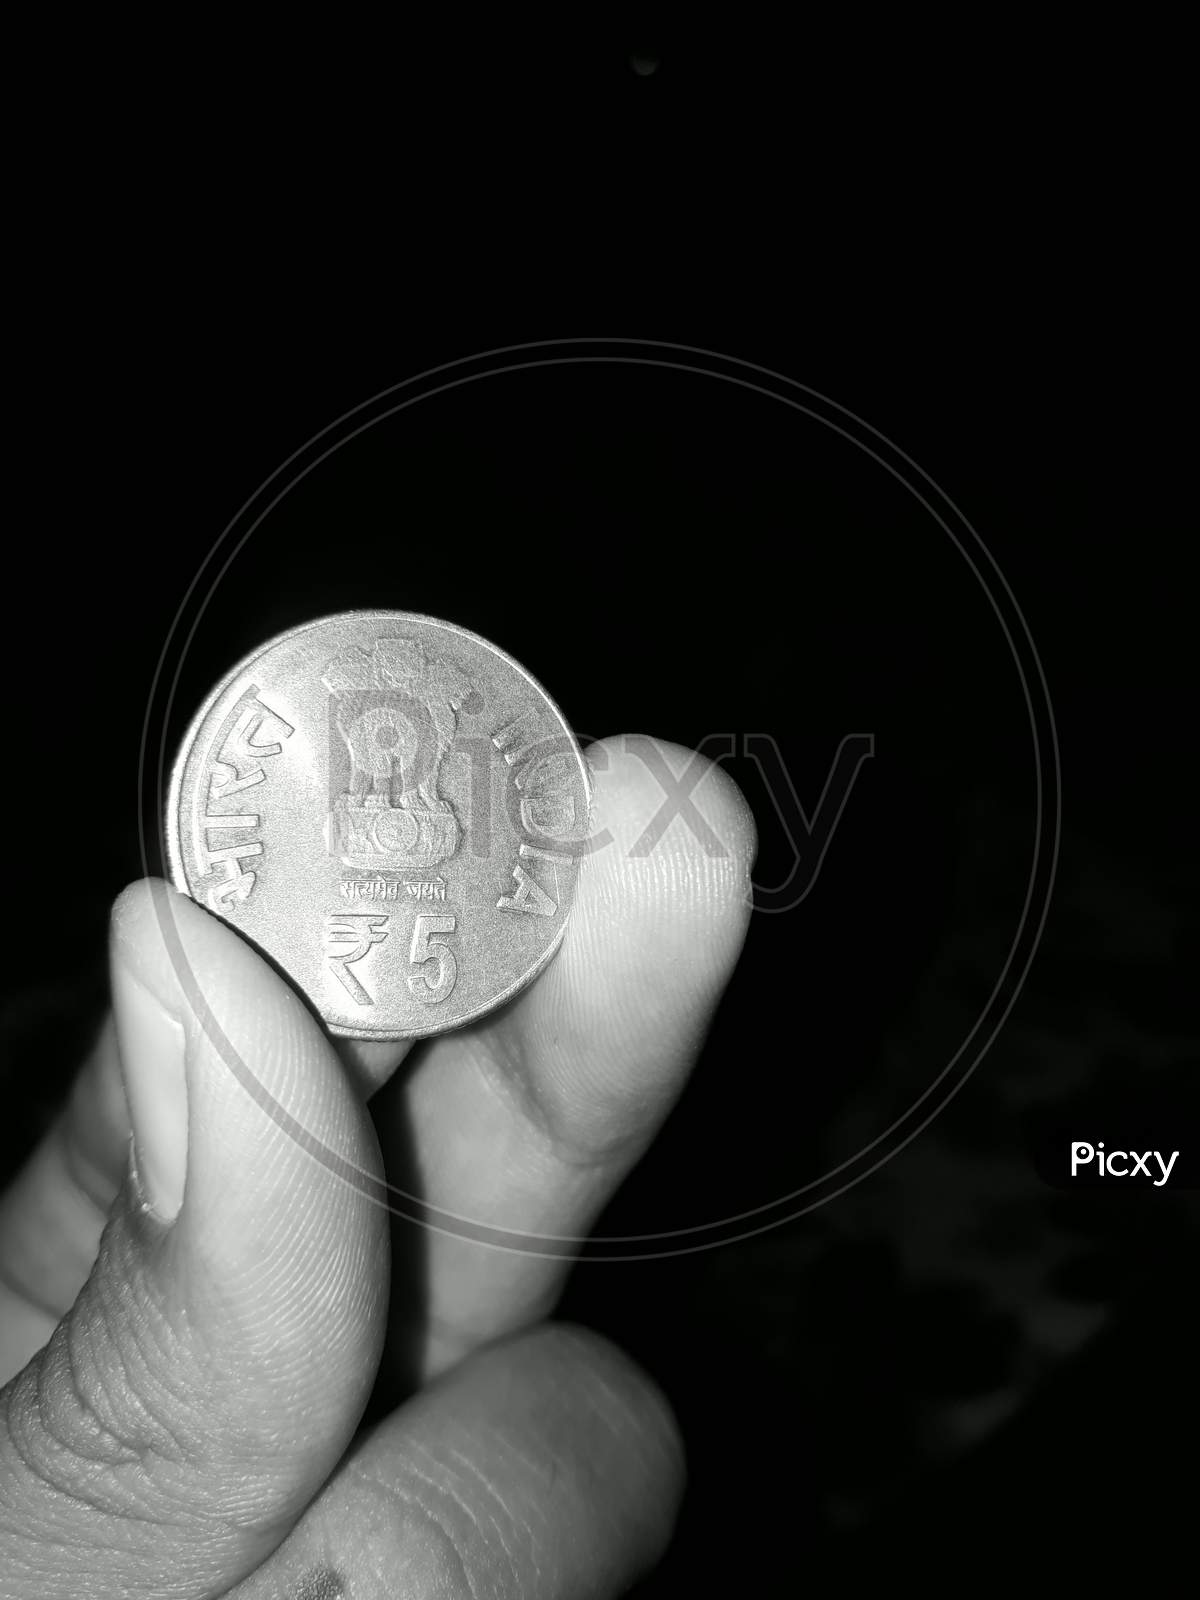 Five Rupees coin